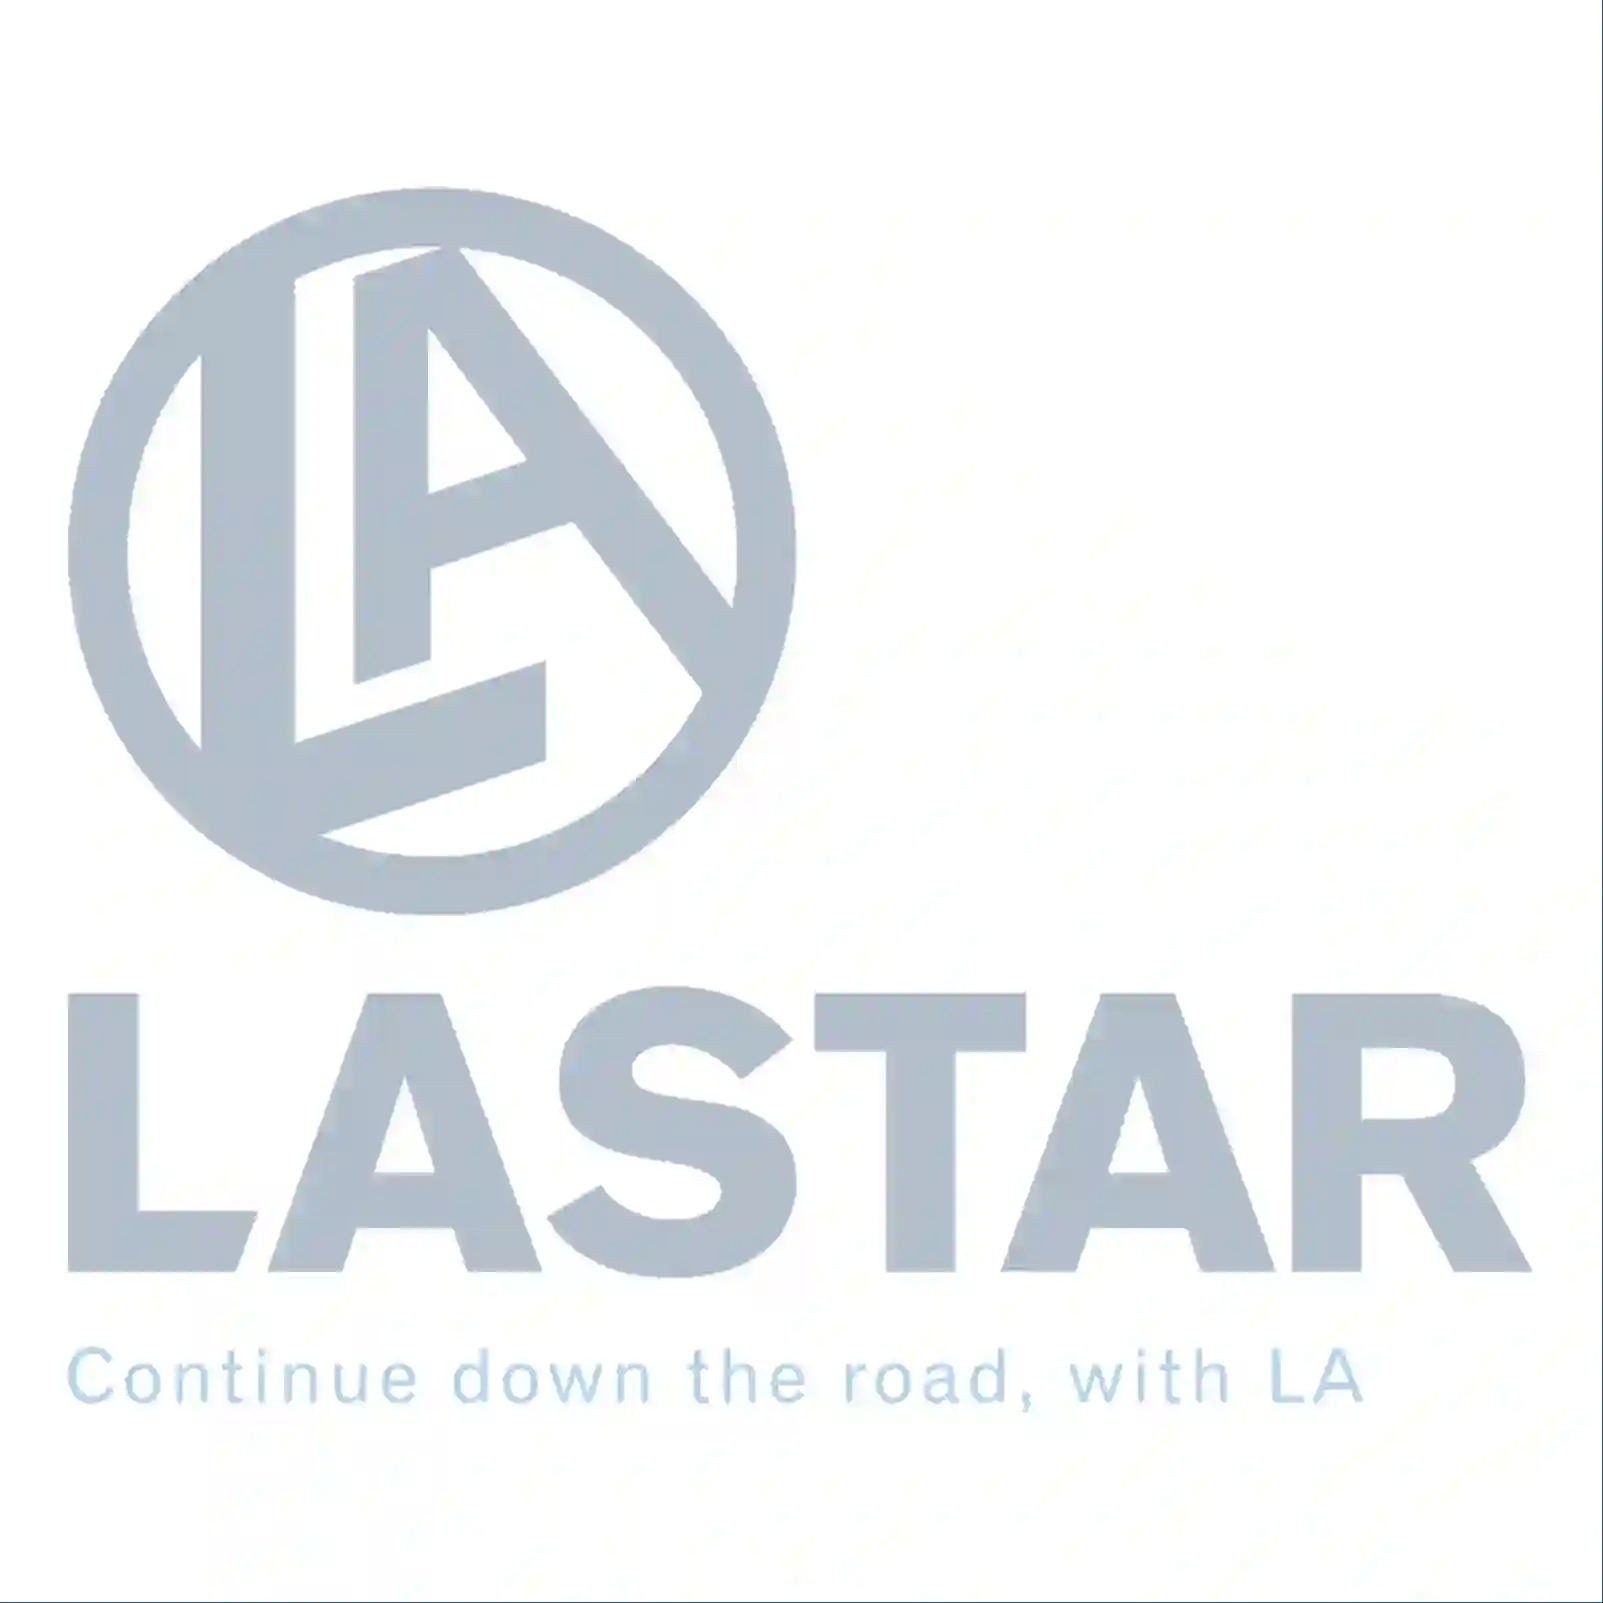  Turn signal lamp, lateral, right || Lastar Spare Part | Truck Spare Parts, Auotomotive Spare Parts